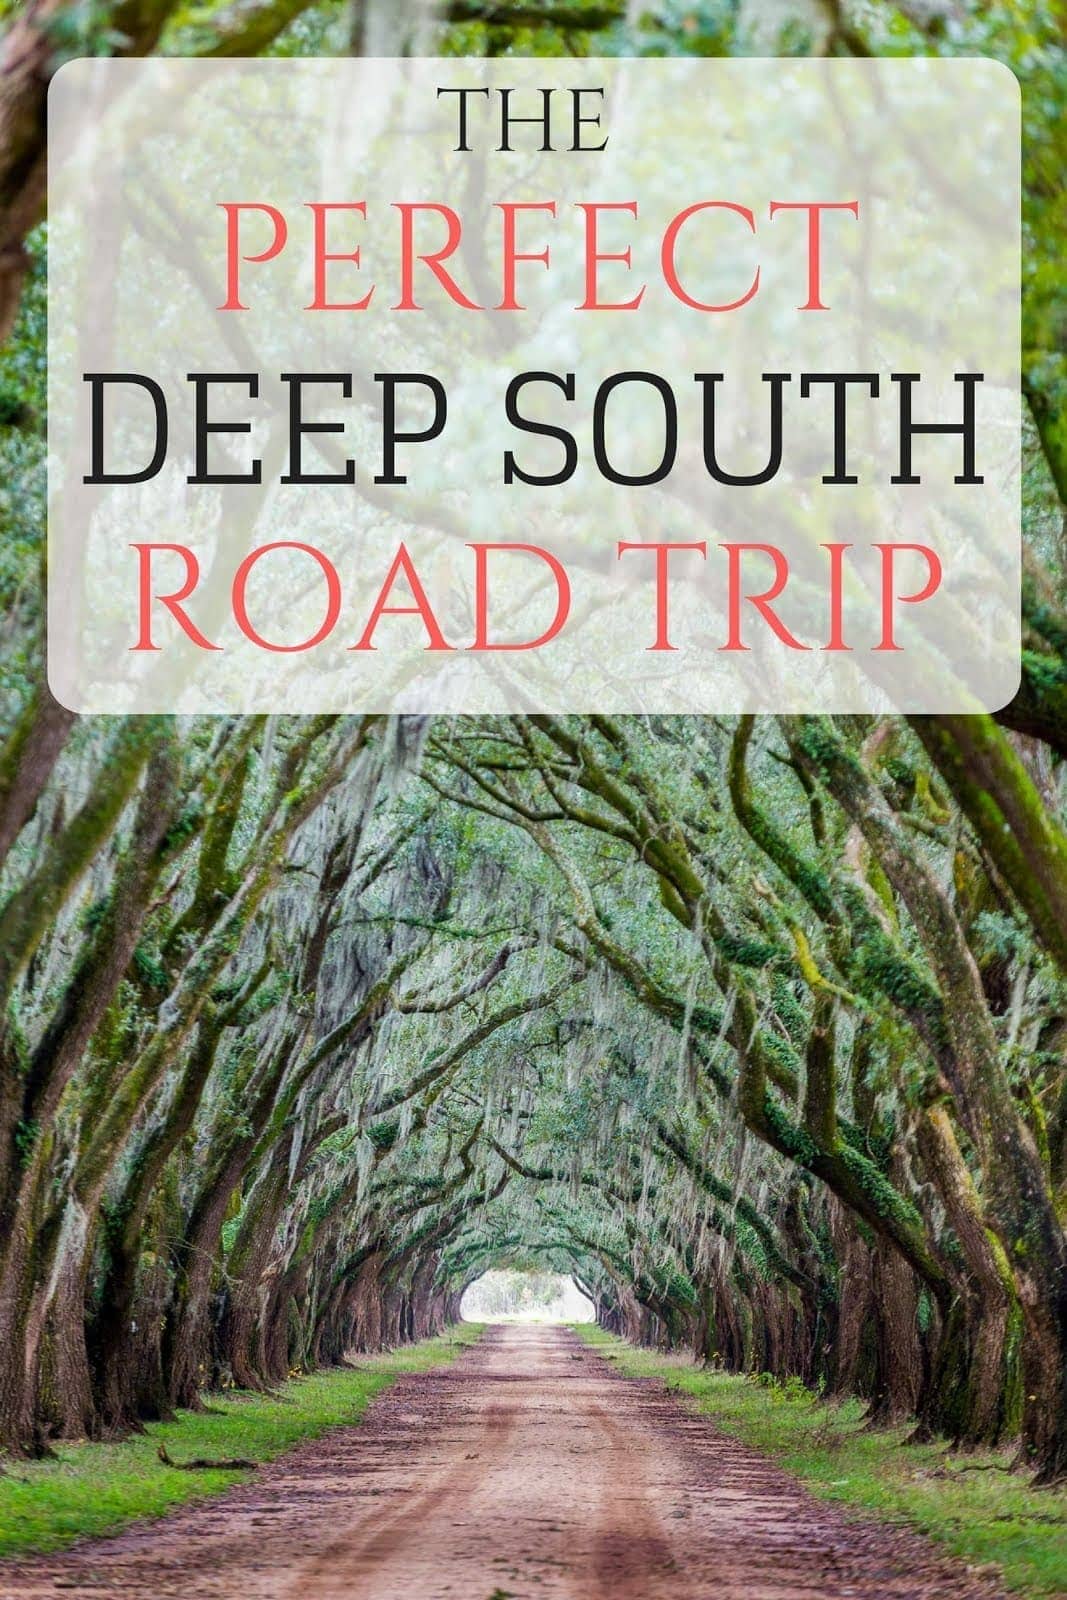 Everything you need to know for the perfect Deep South road trip, including an itinerary, hints on what see and do, where to stay, when to go, and lots of planning tips!